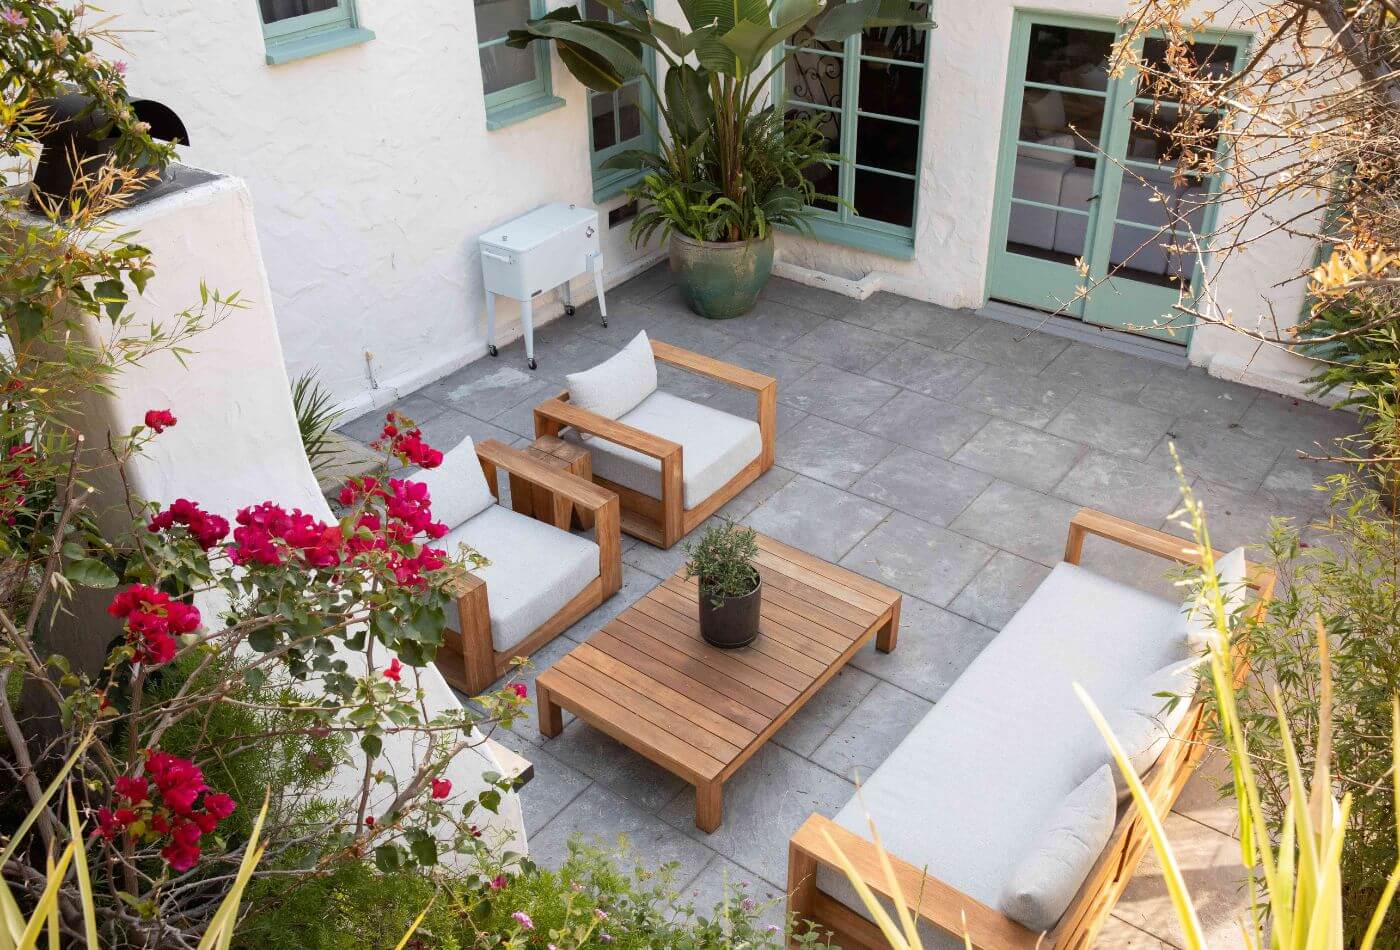 Choosing The Right Types Of Floors For Your Garden Patios; Consider Things To Follow: